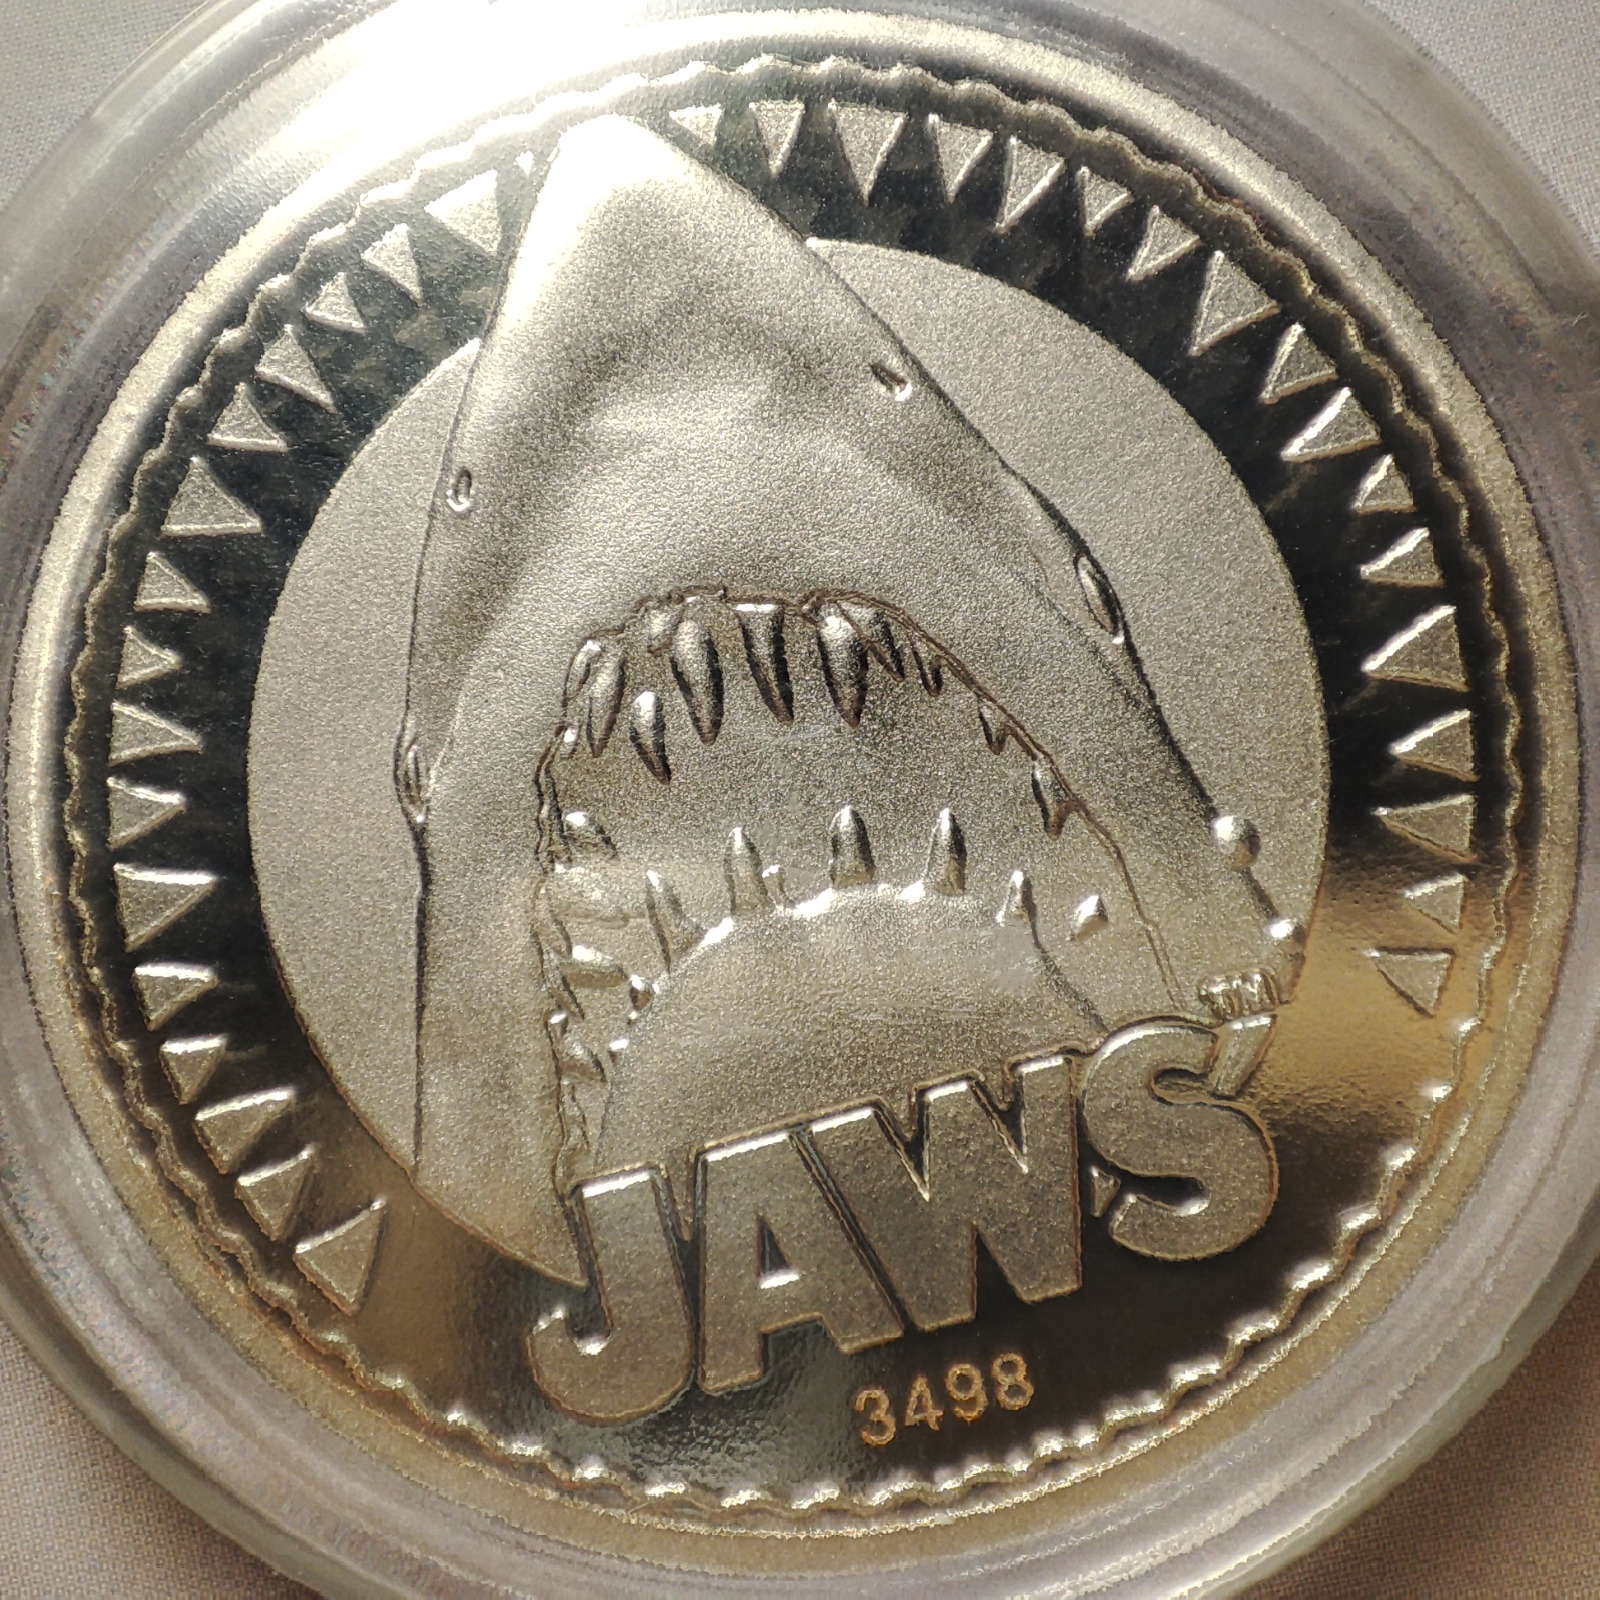 Jaws Limited Edition Metal Coin Official Movie Collectible Emblem Badge